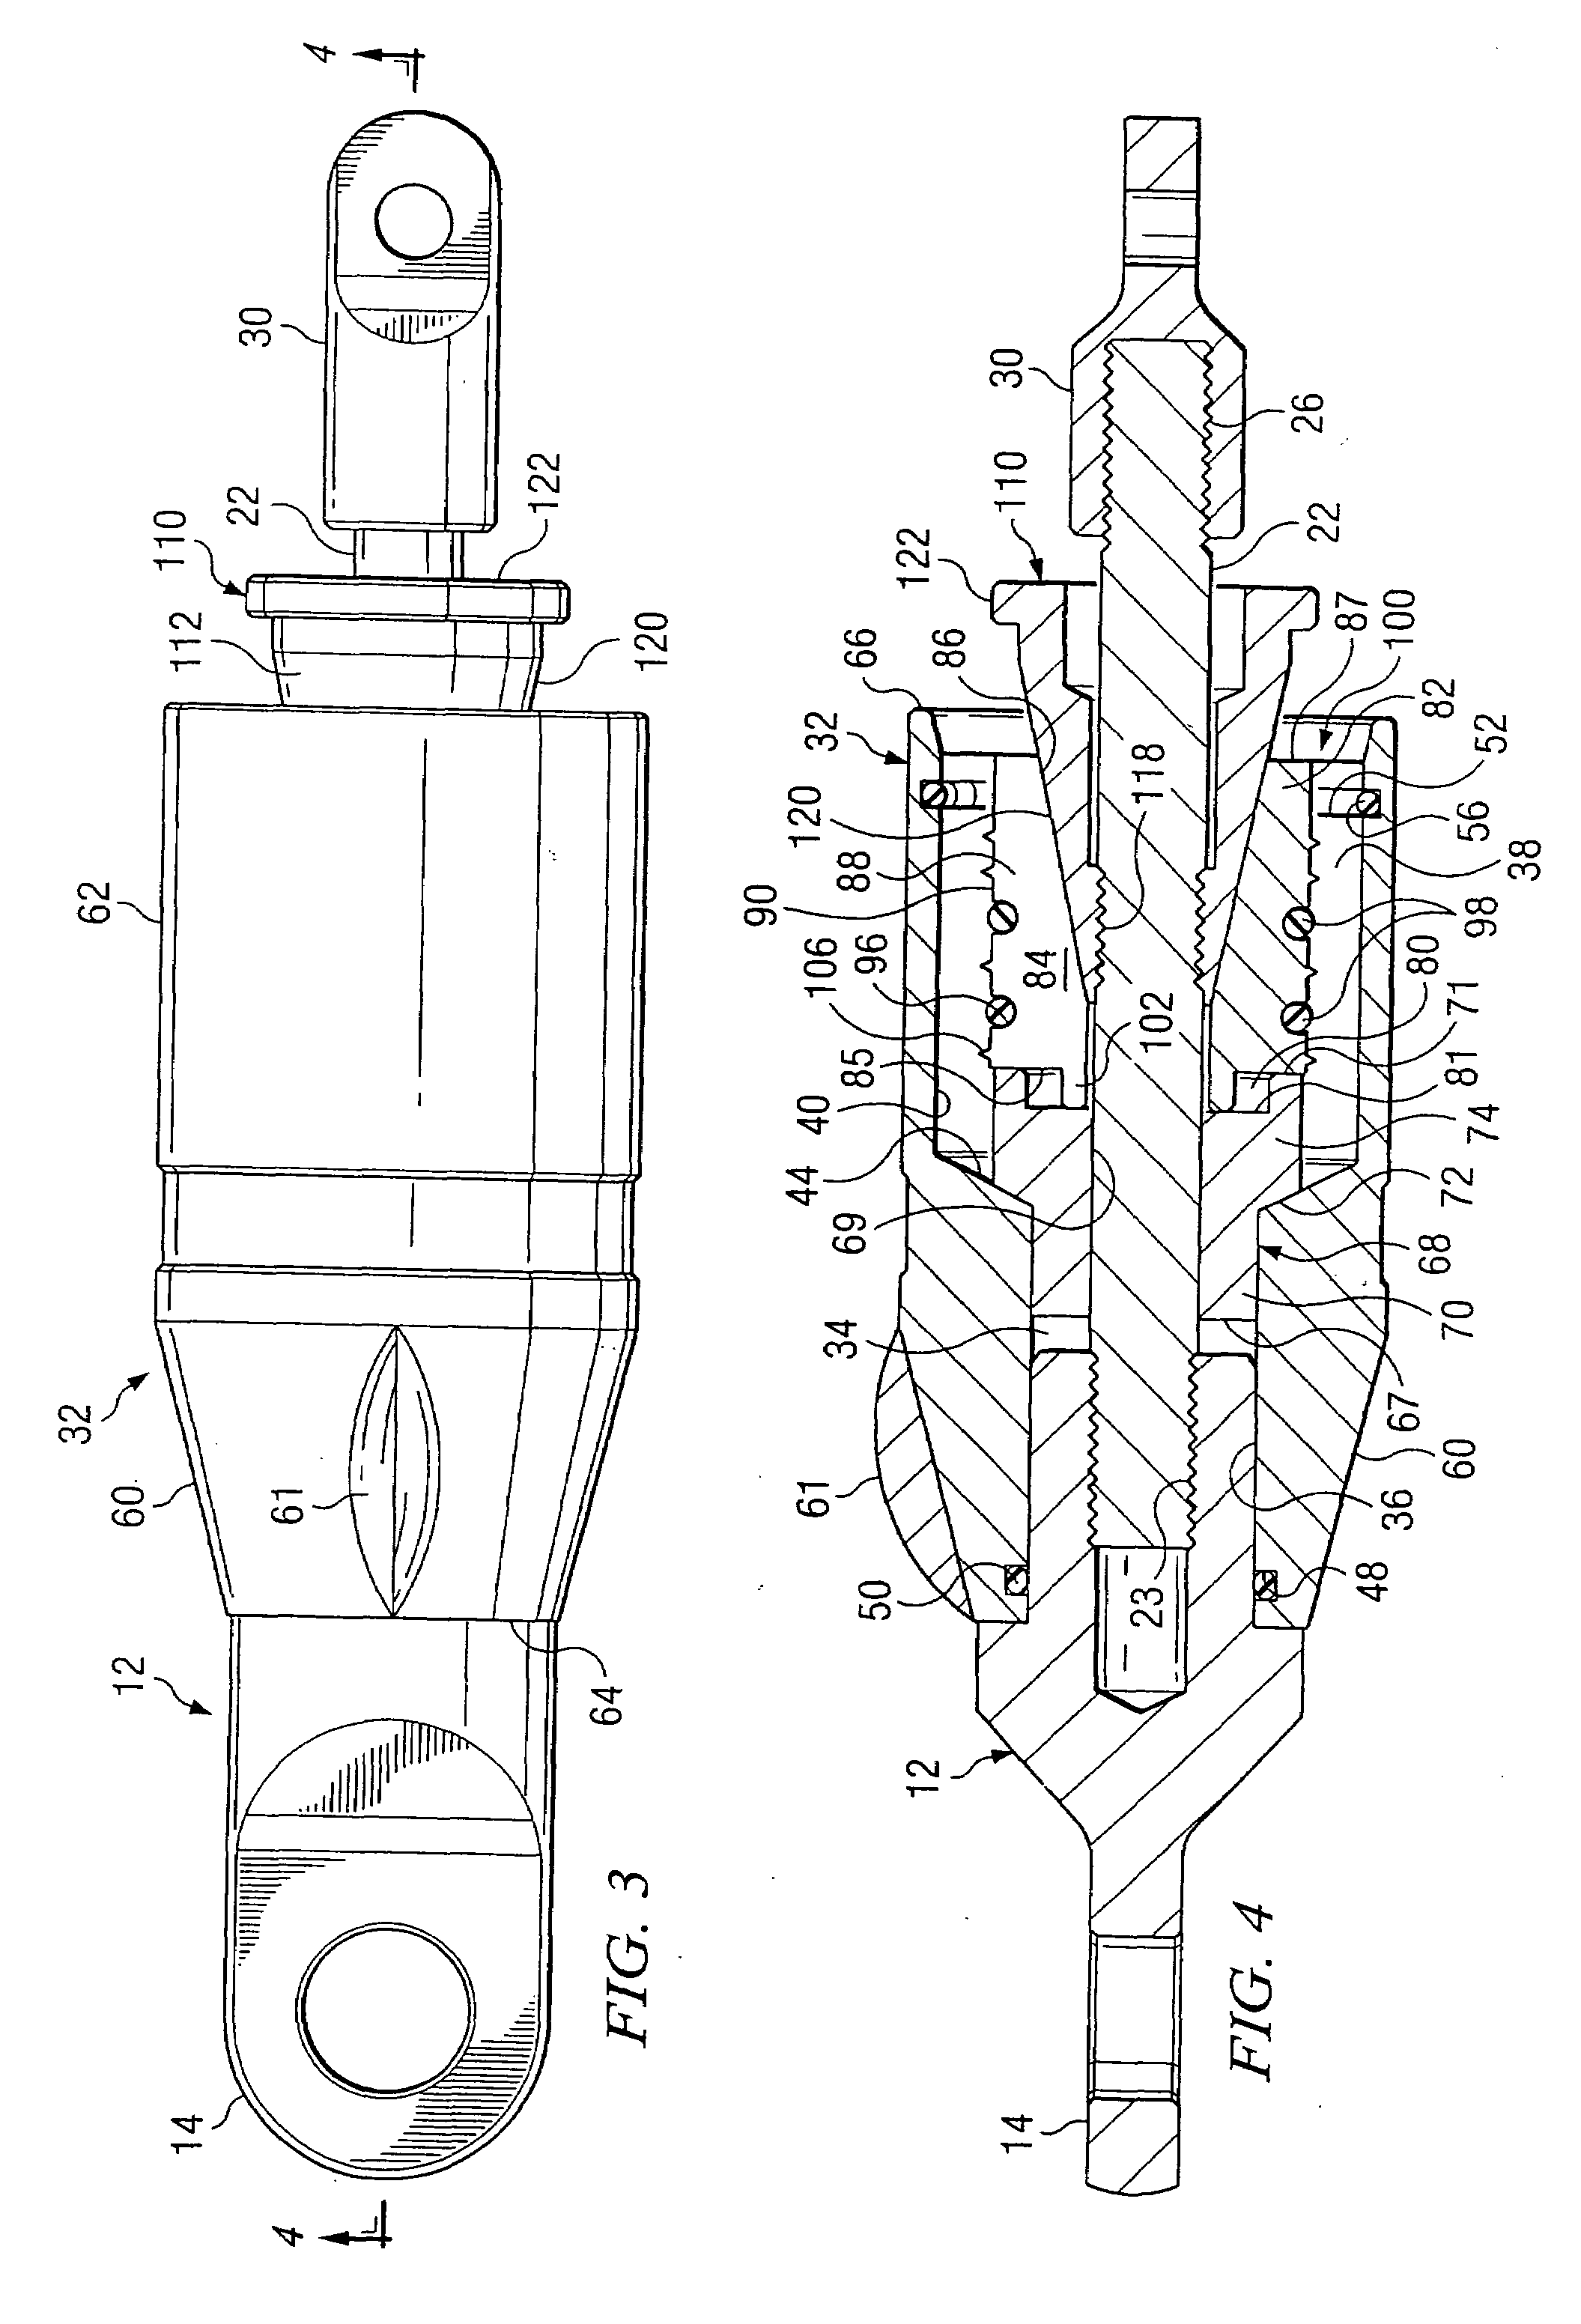 Pipe bursting and replacement apparatus and method